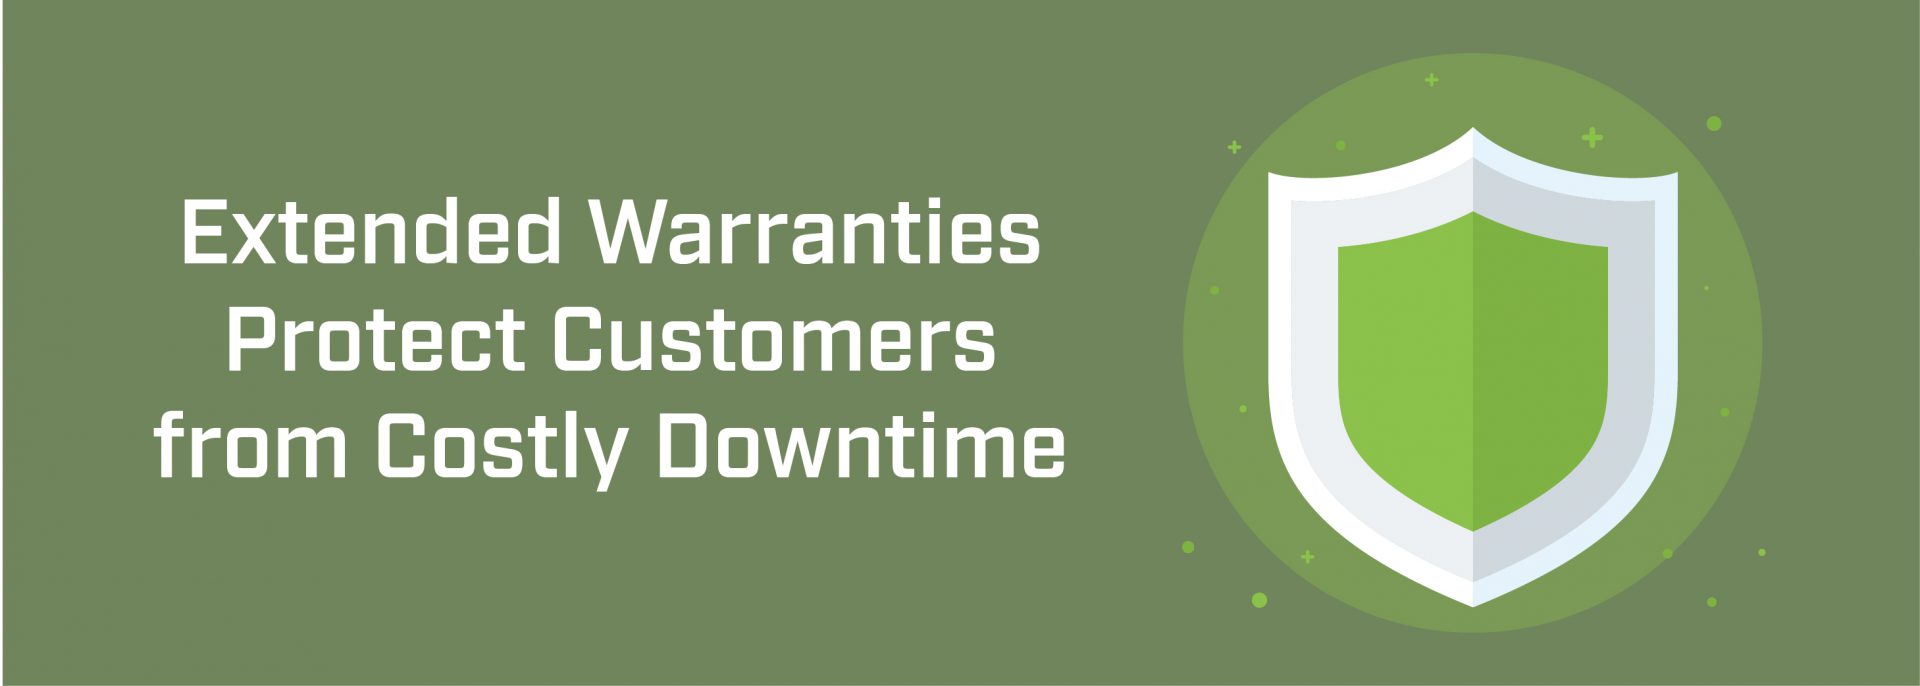 Extended Warranties Protect Customers from Costly Downtime | ADI Agency